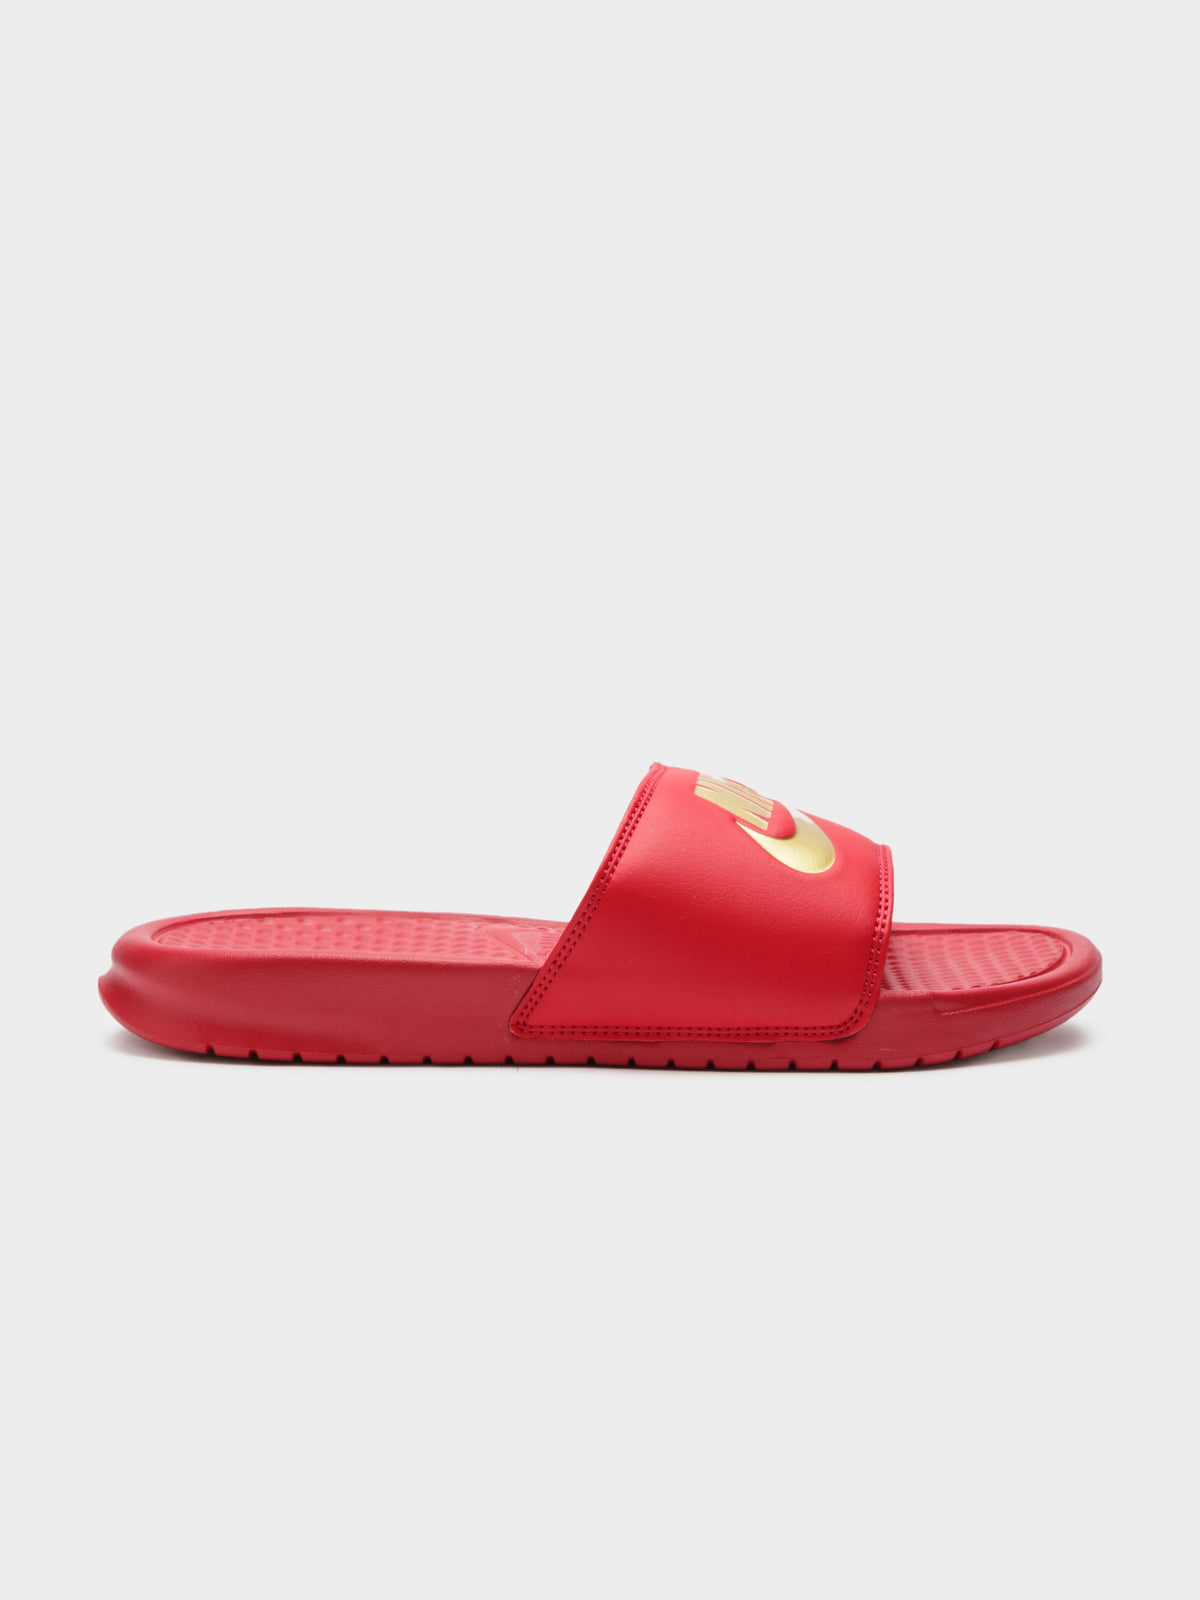 Mens Benassi Just Do It Slides in University Red and Metallic Gold